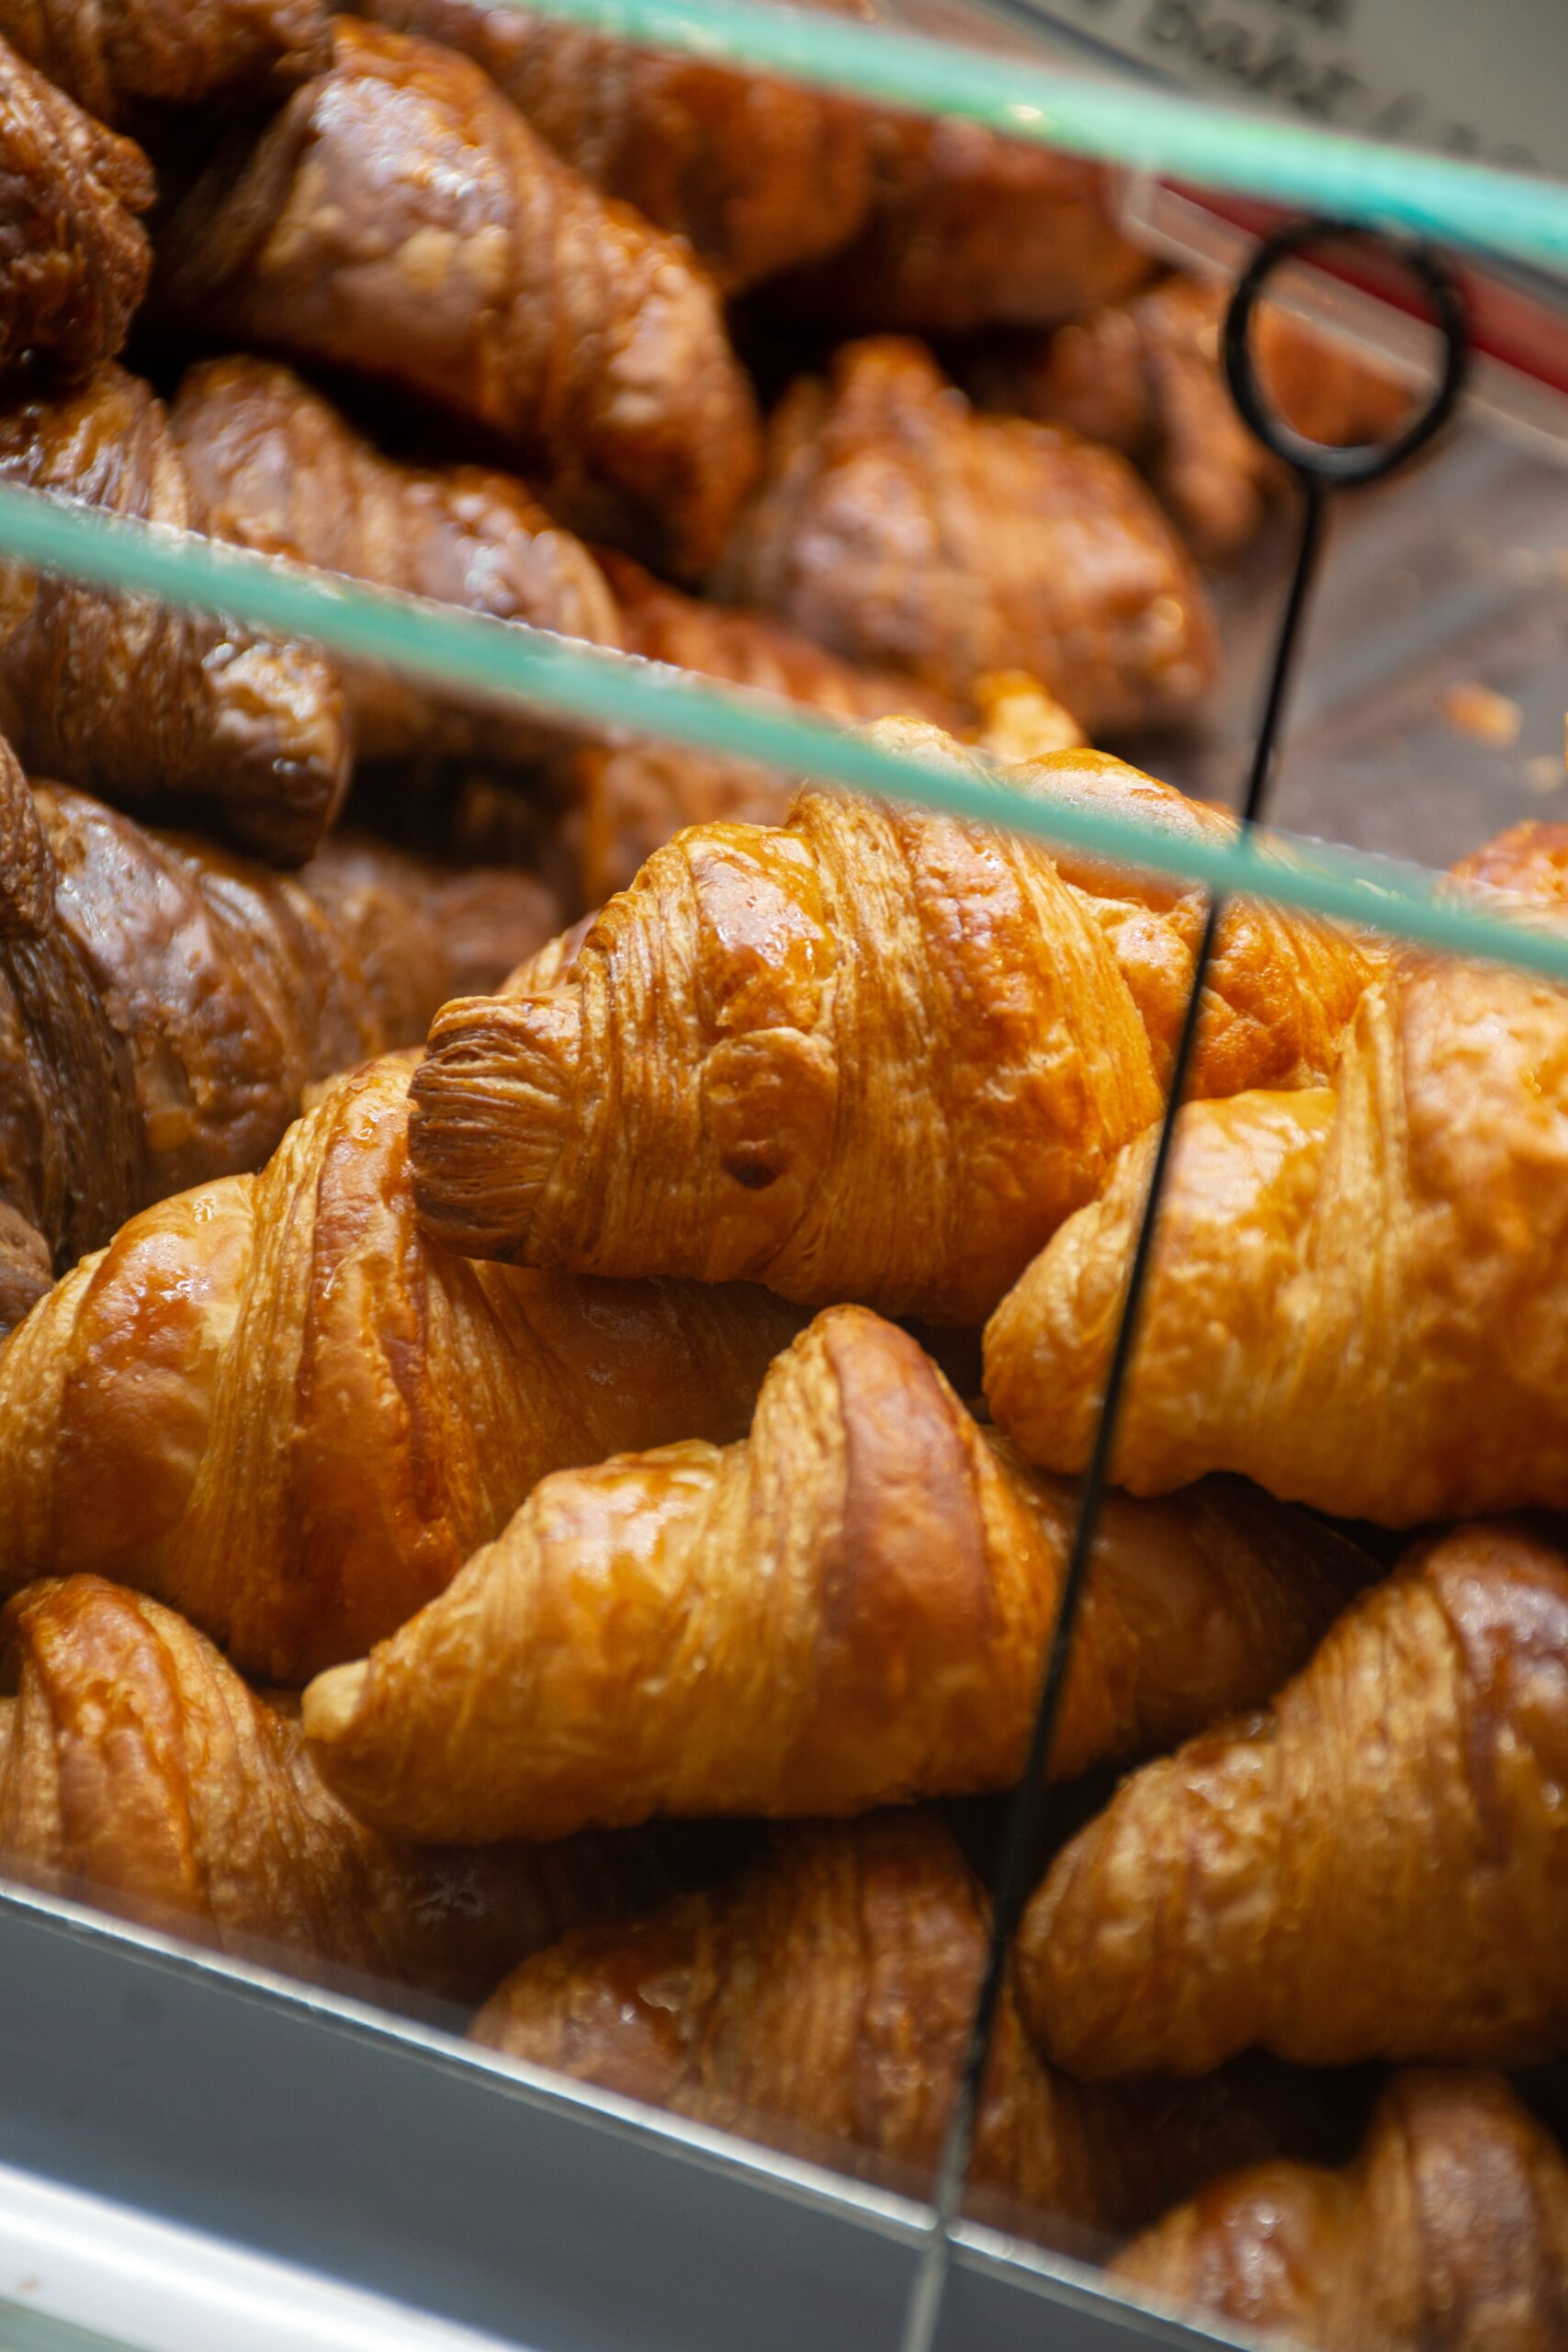 A collection of croissants.